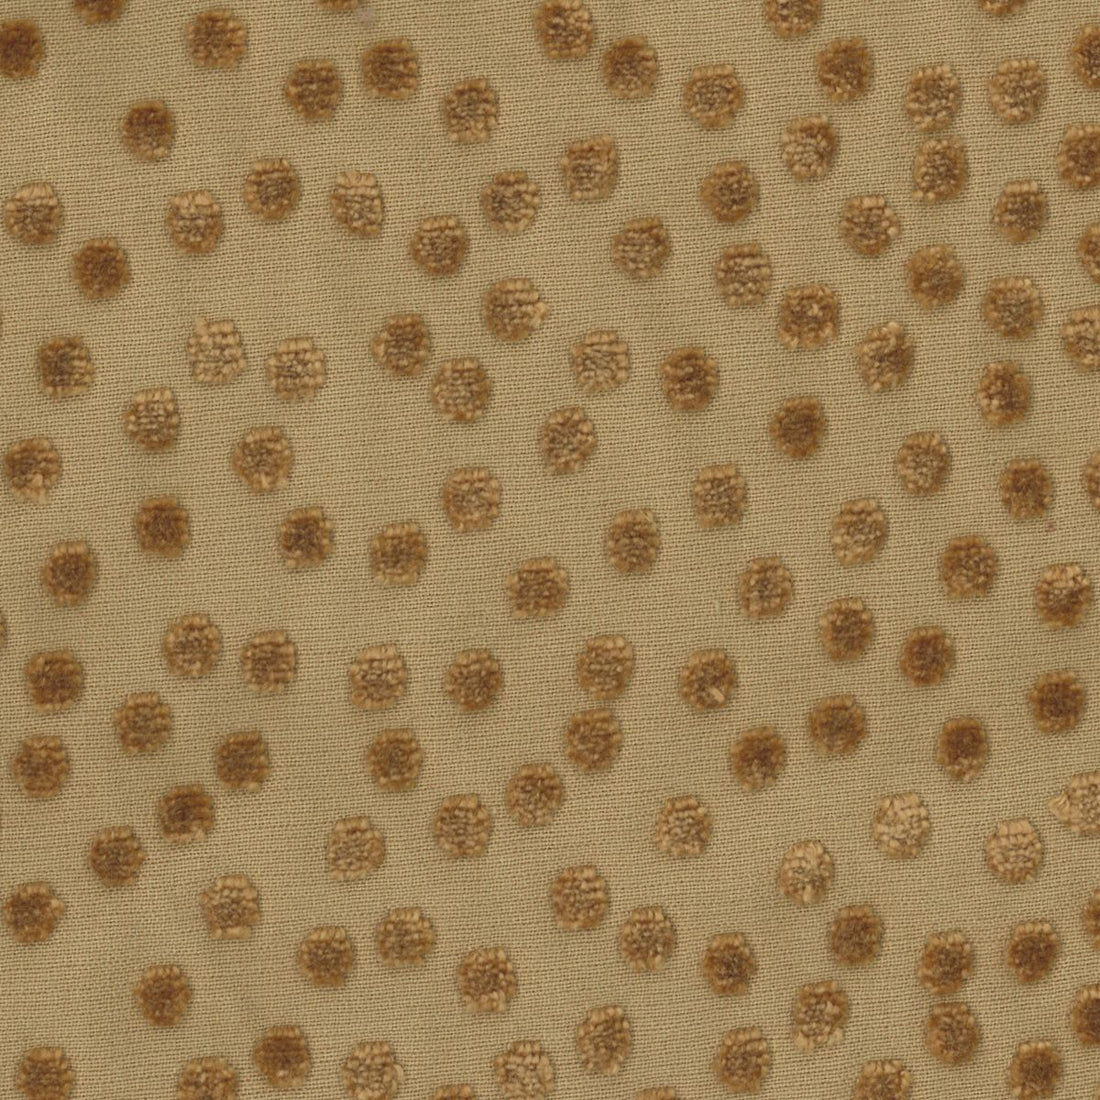 Dotty fabric in desert color - pattern number GG 00042005 - by Scalamandre in the Old World Weavers collection